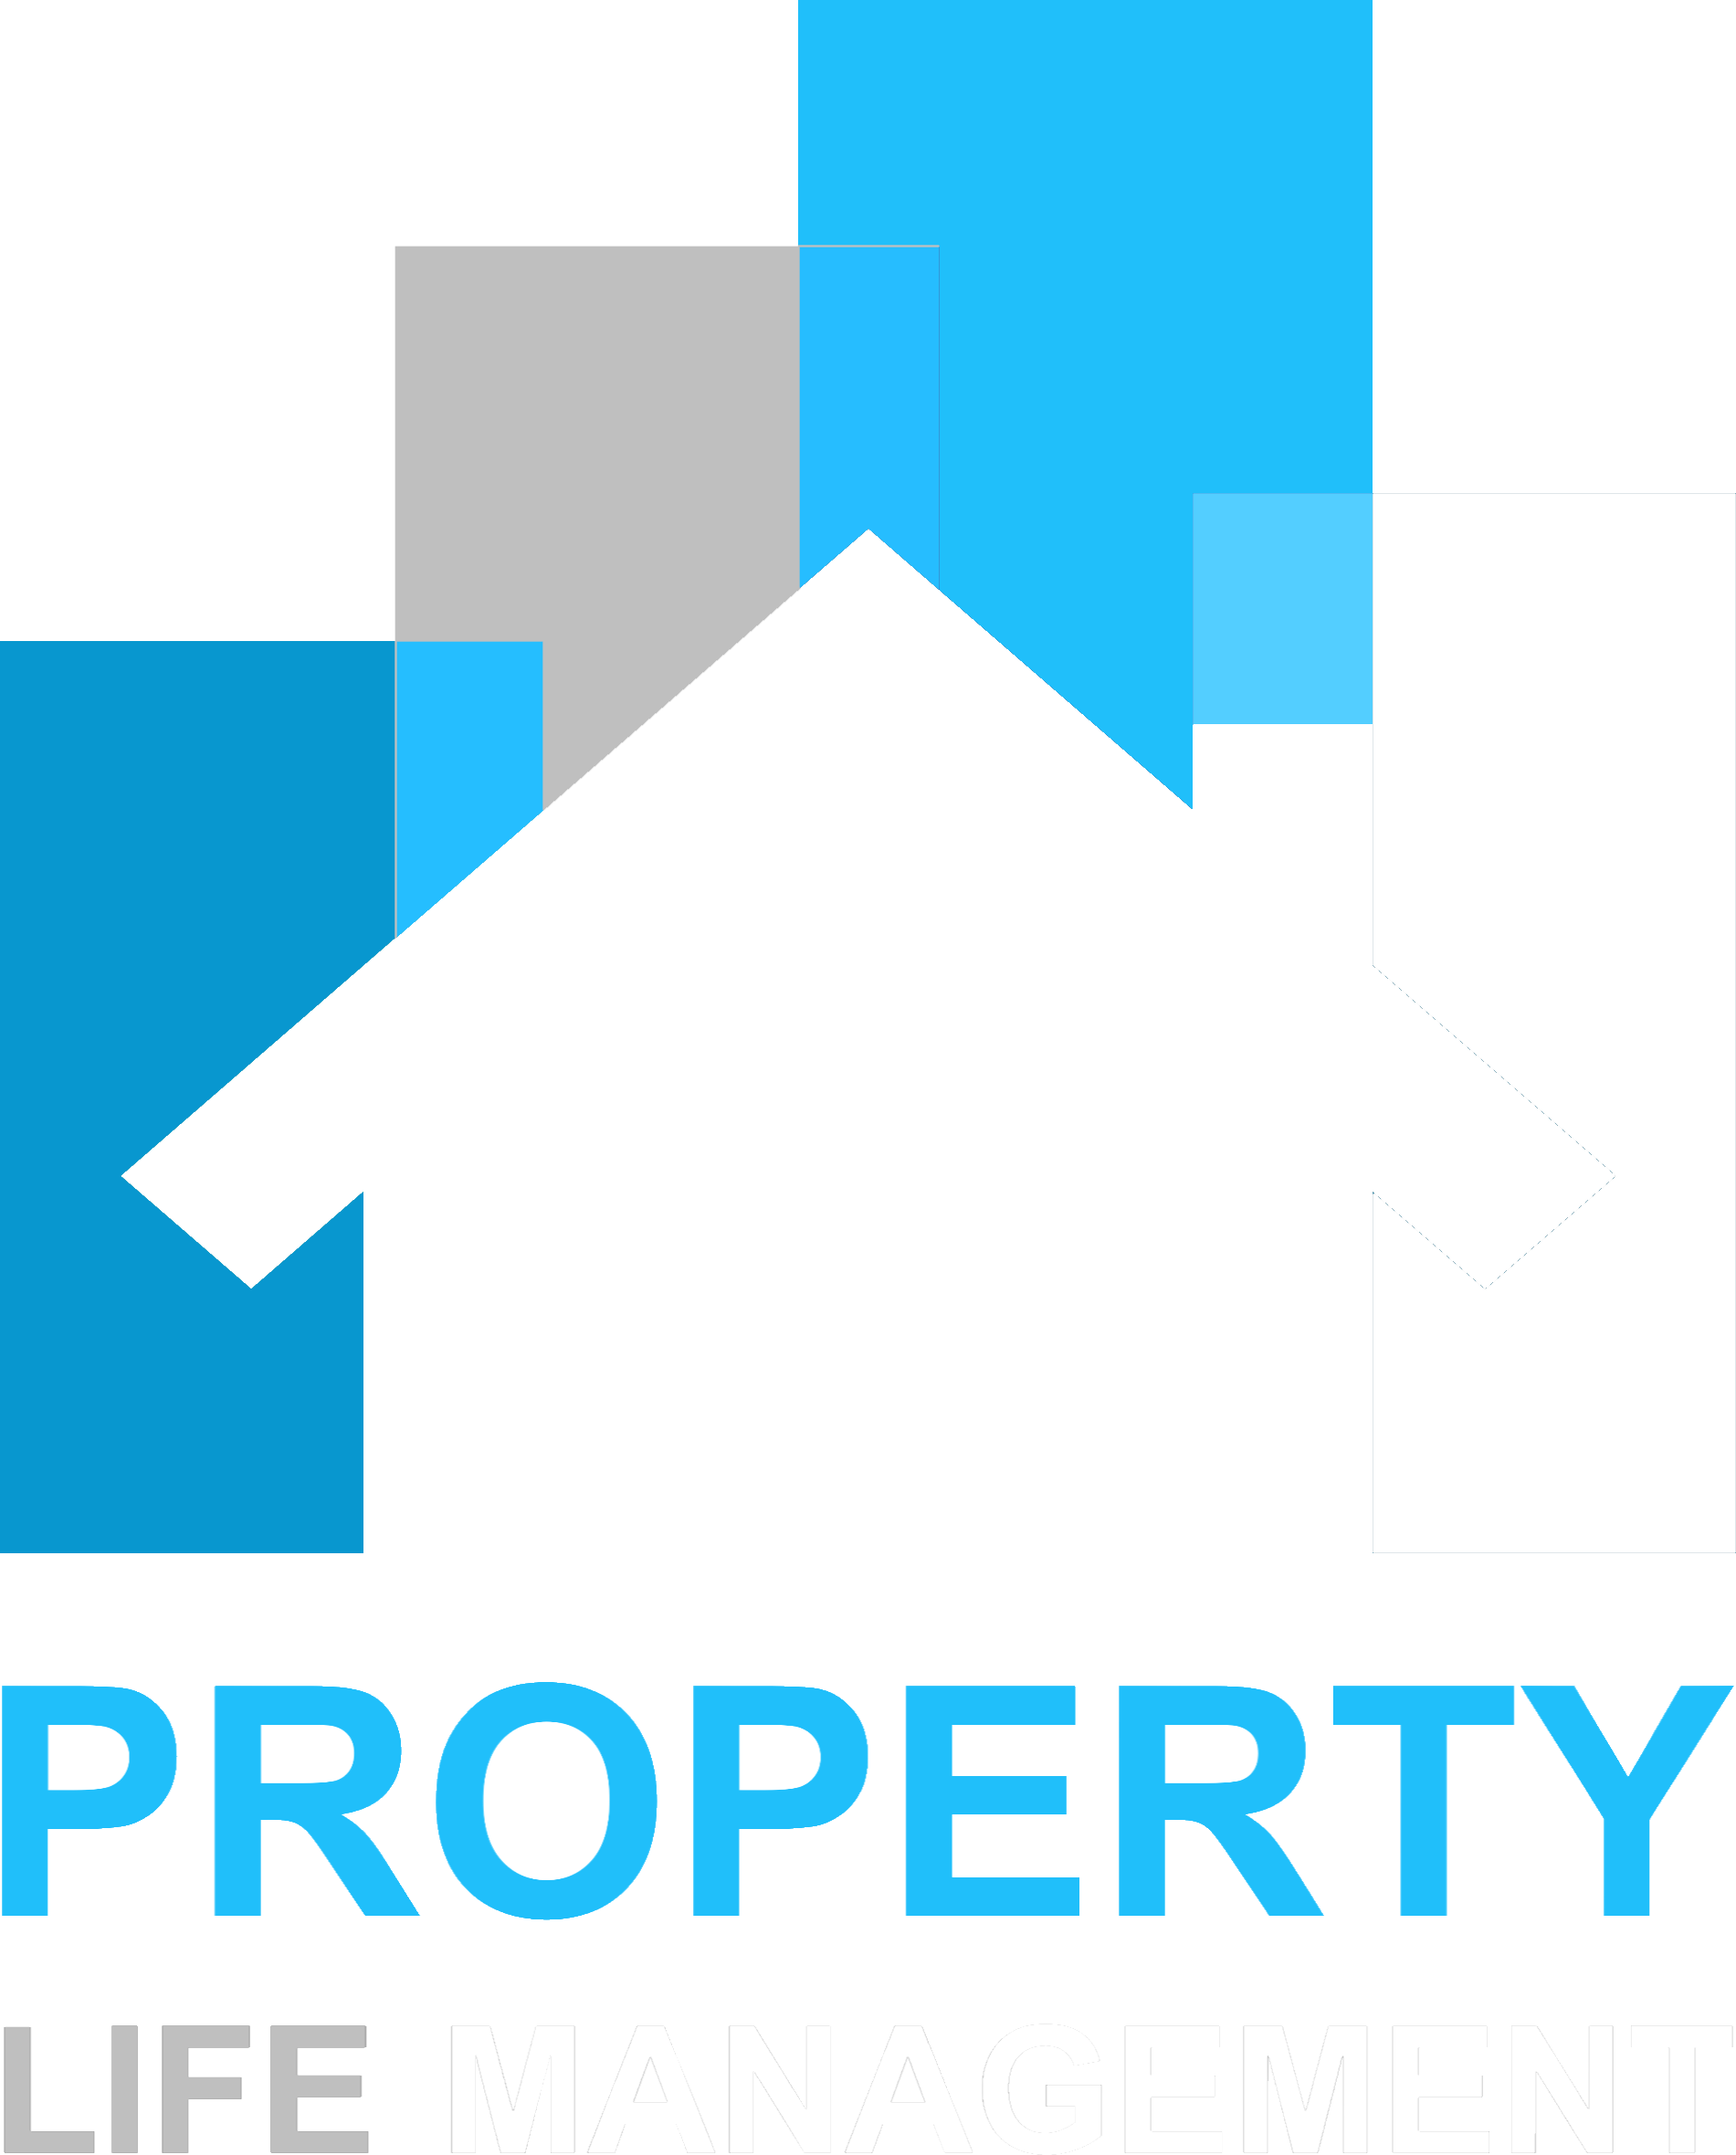 Property Life Management – Your trusted partner to manage the life and ...